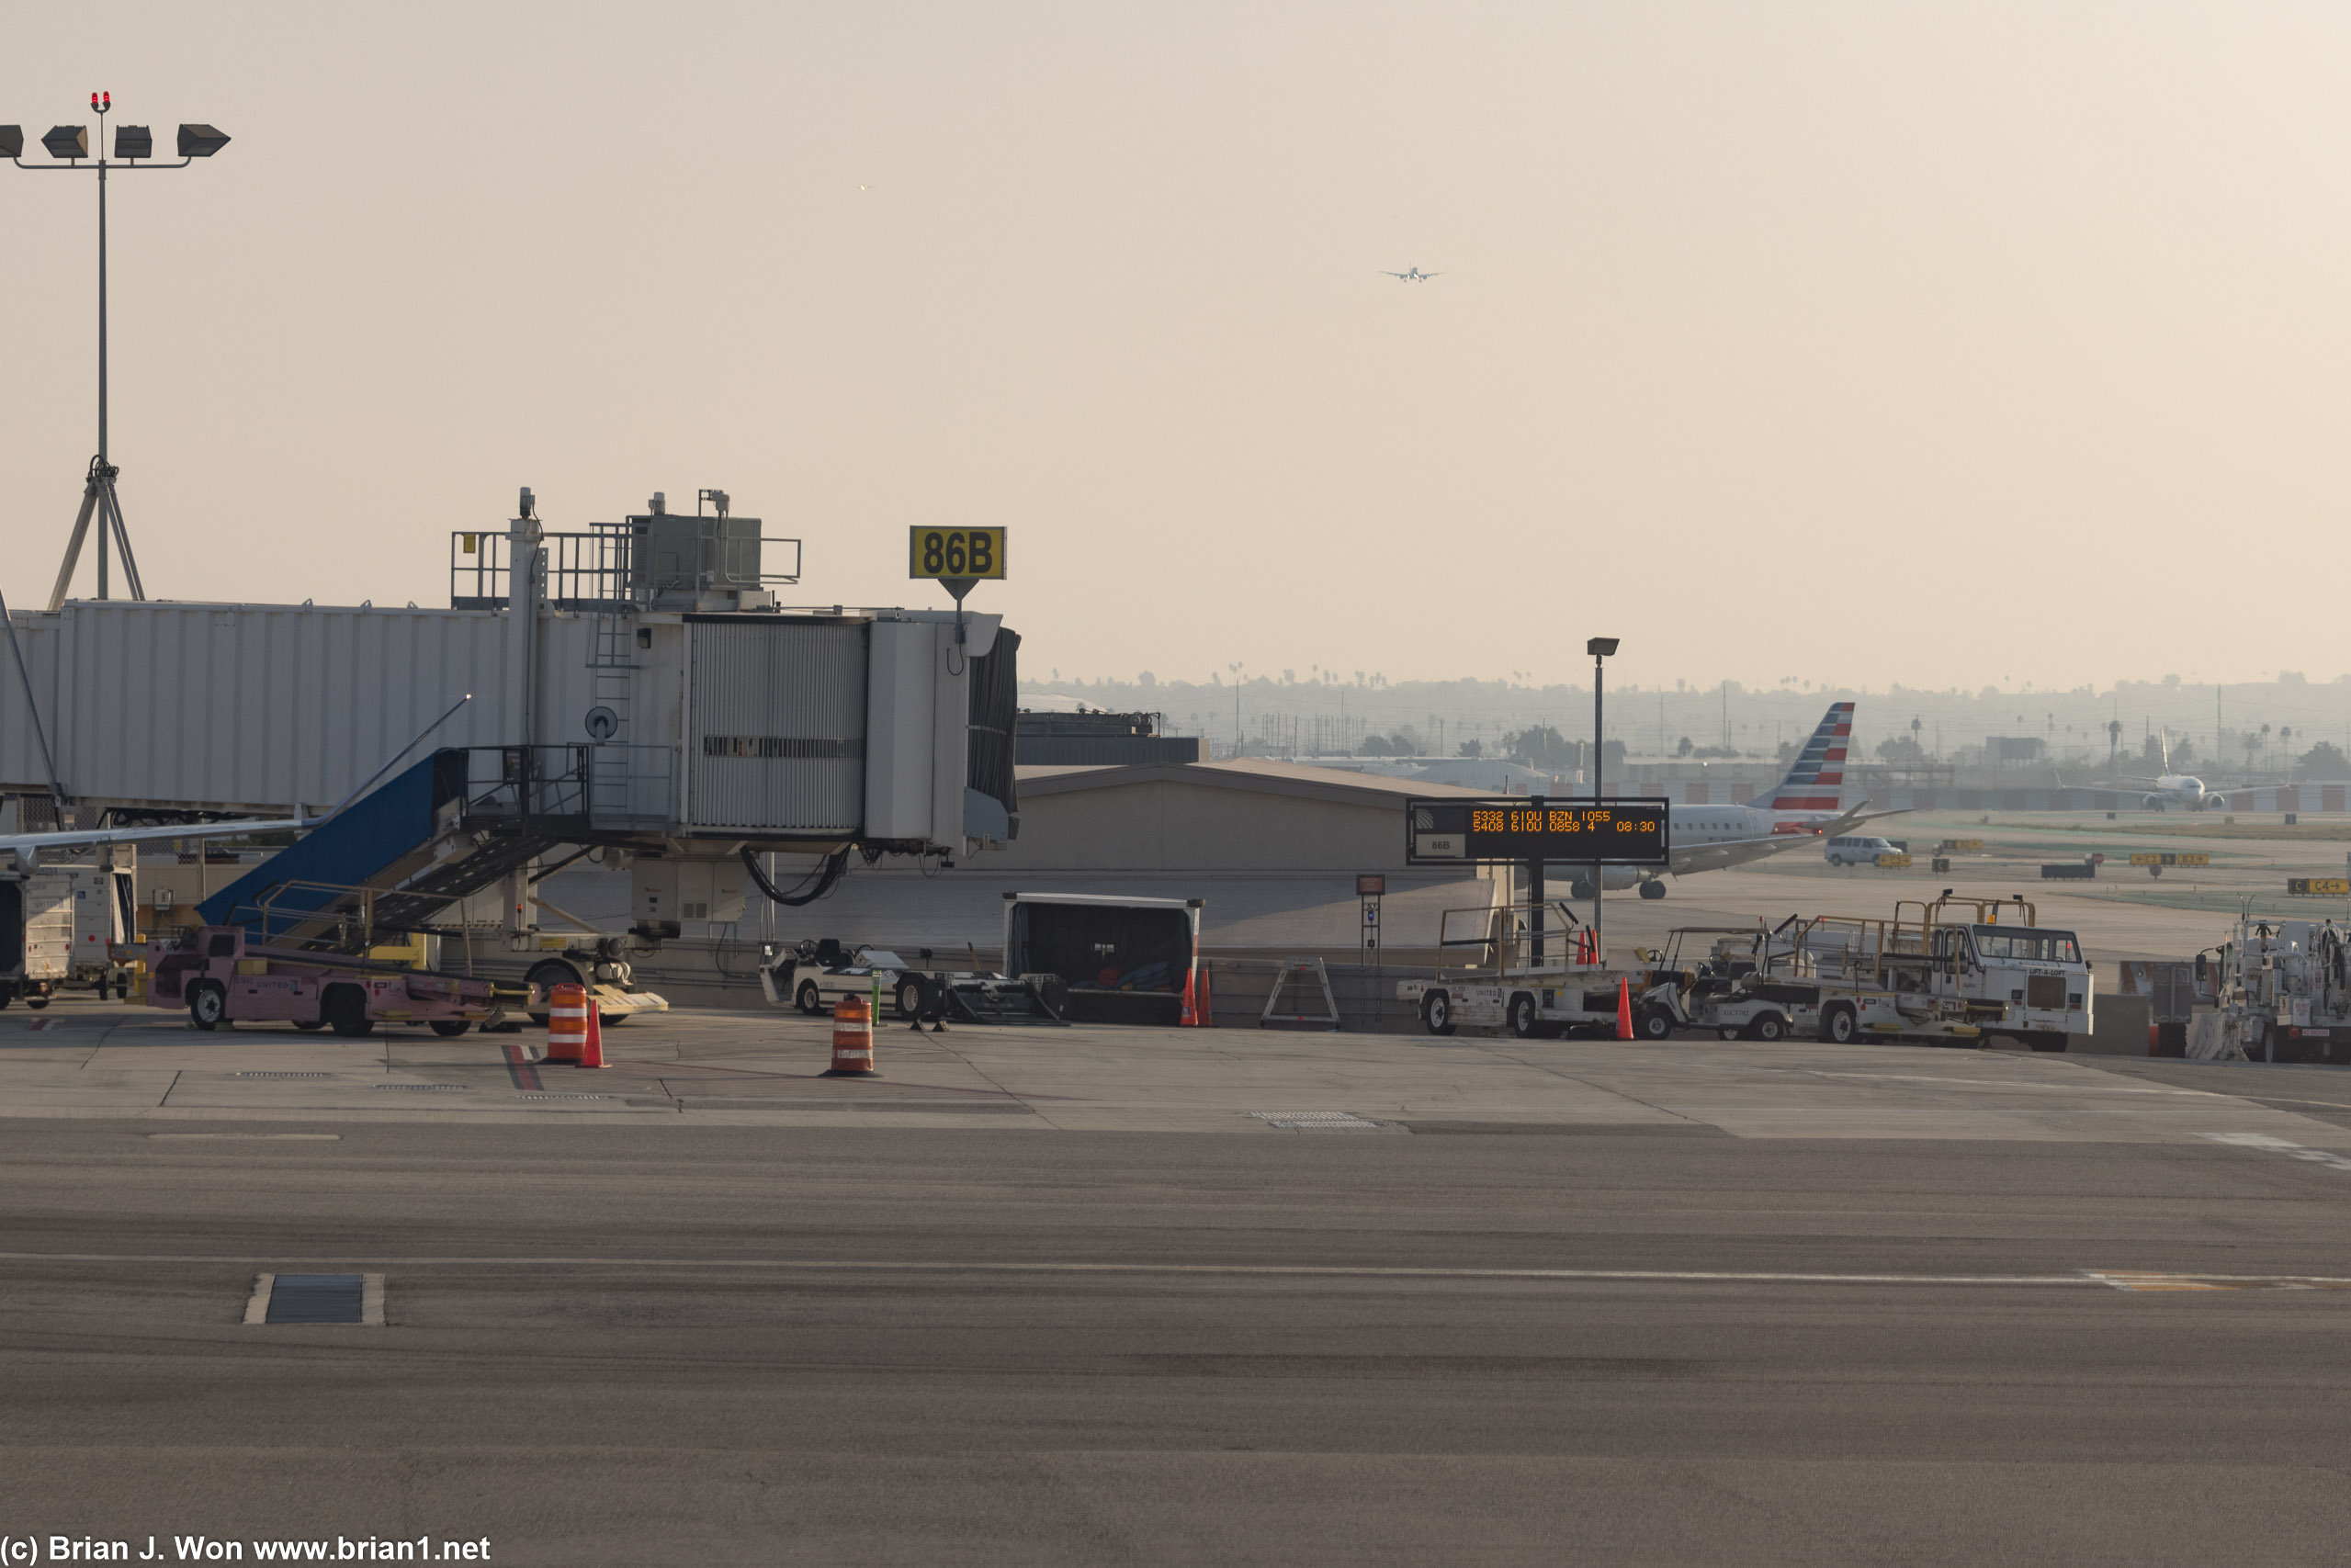 Looking across at Terminal 8, with an American Airlines jet inbound in the distance.